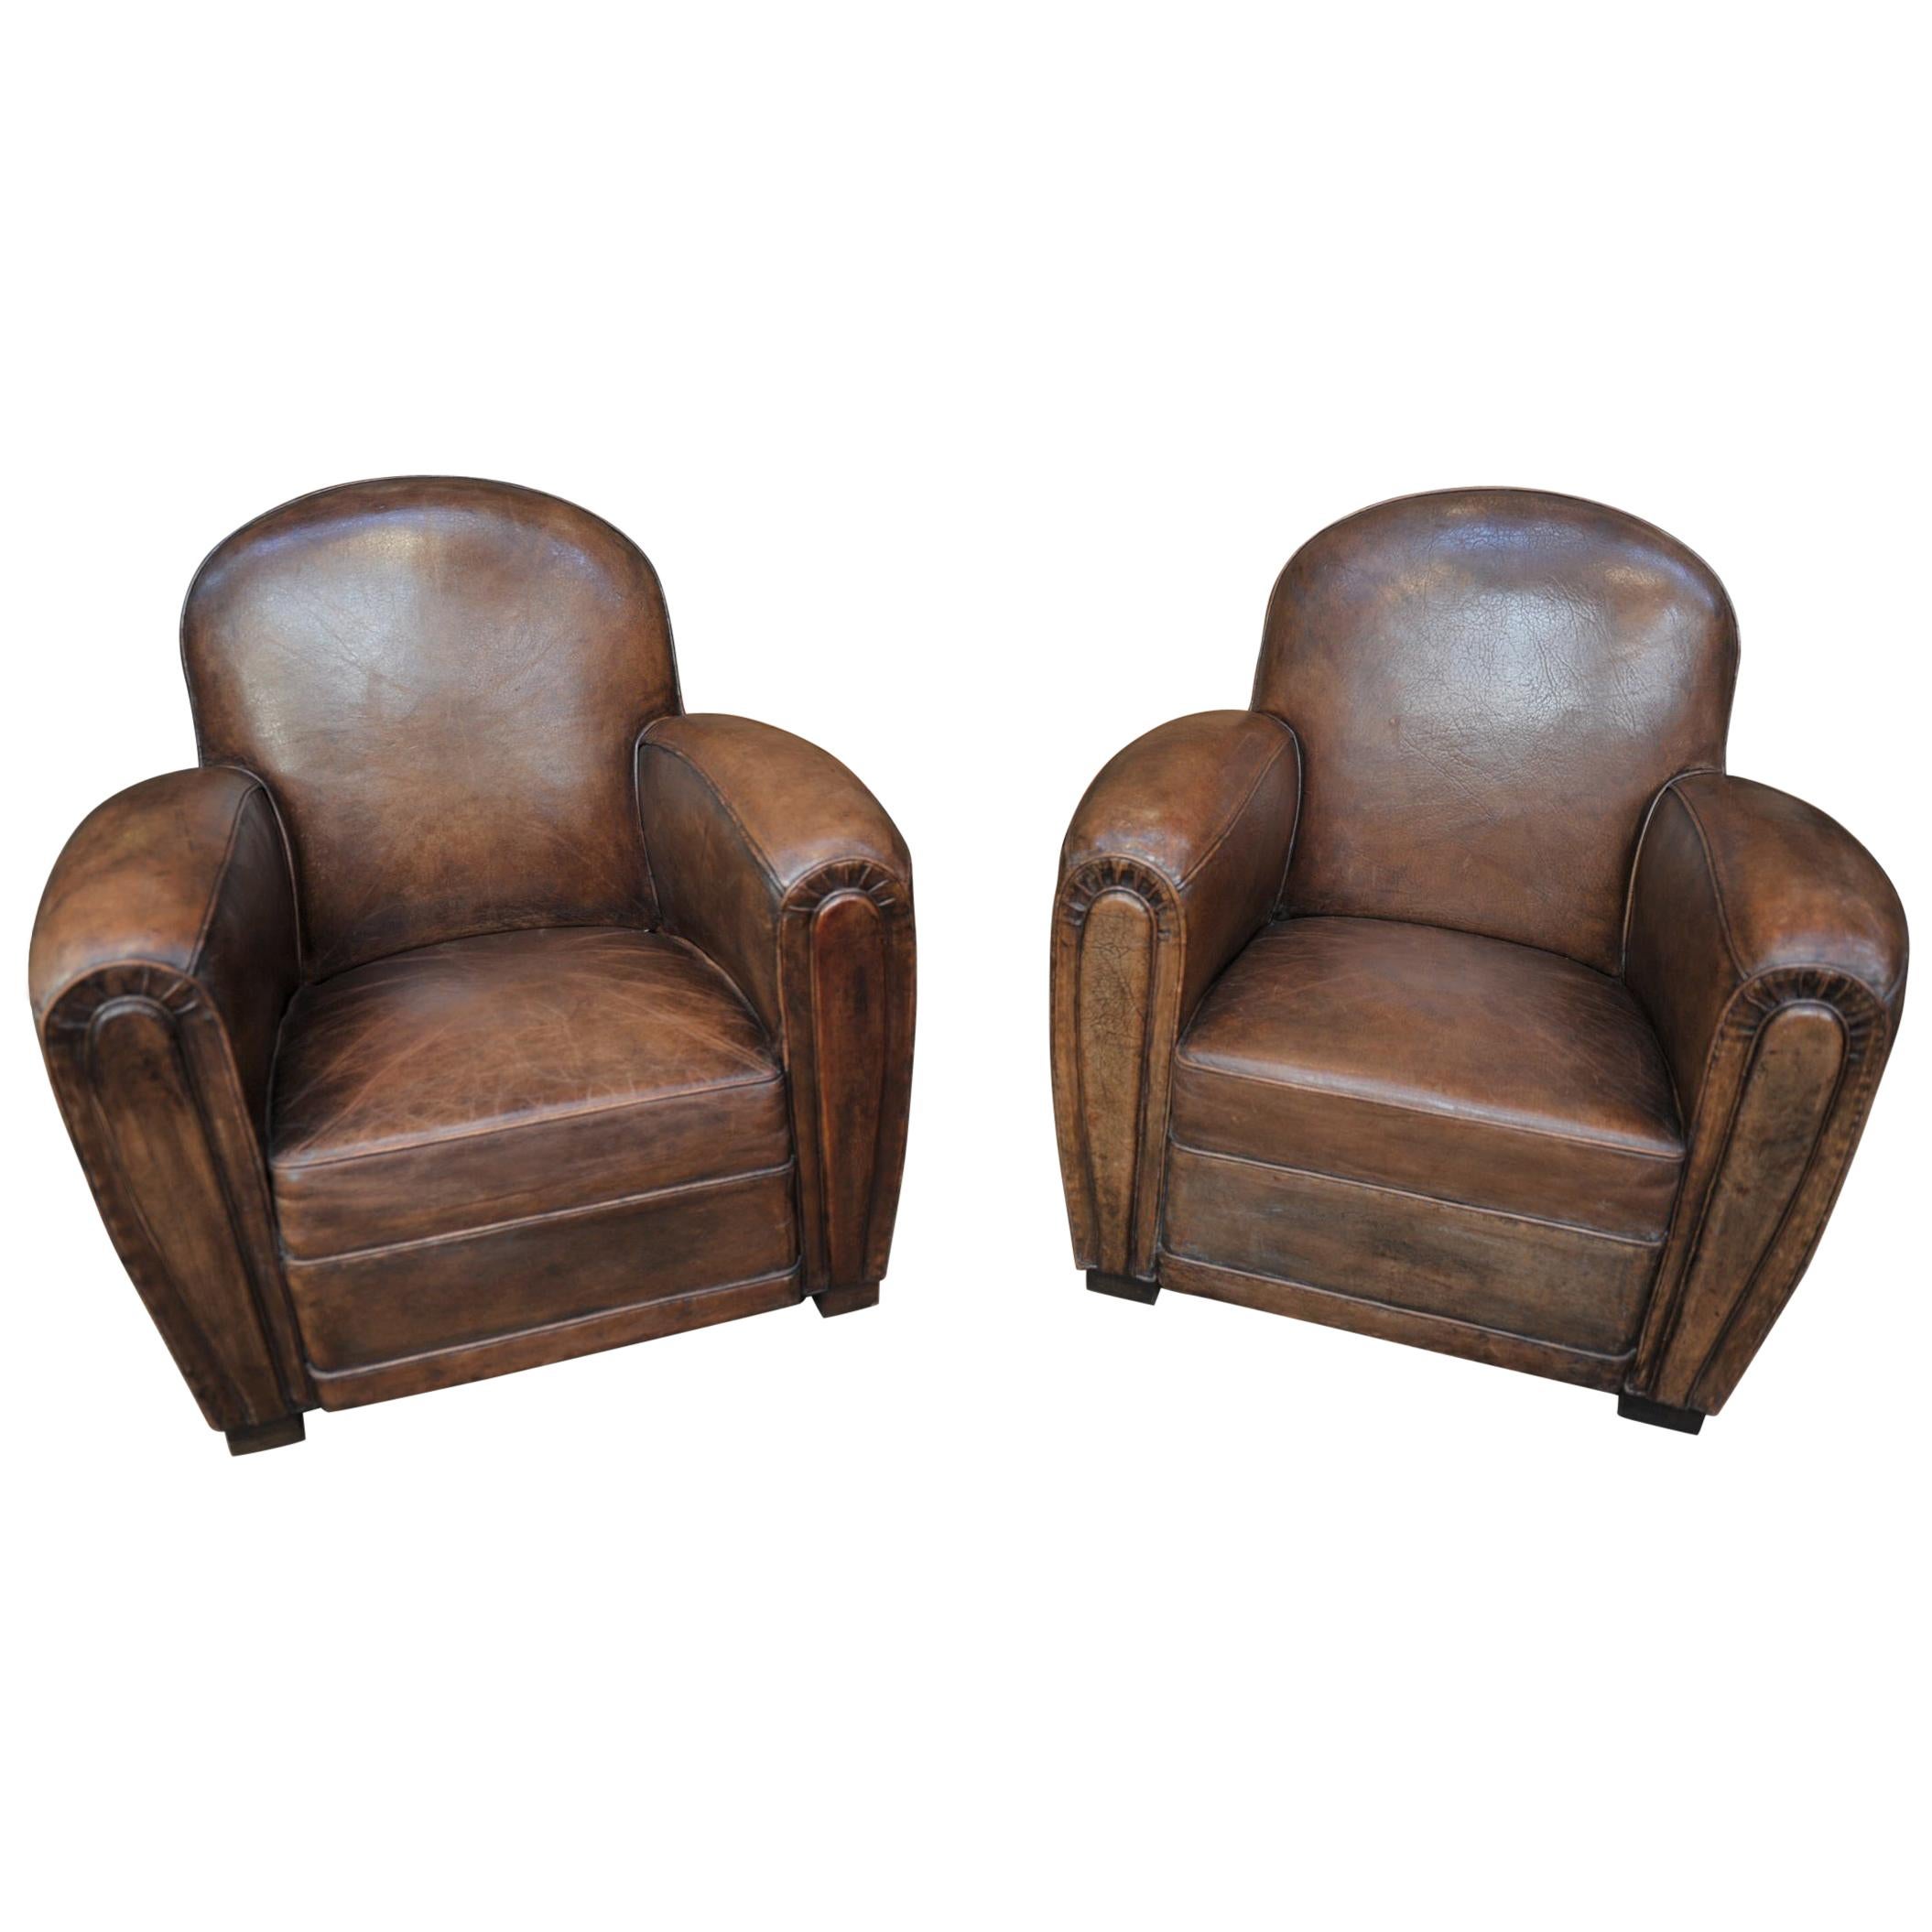 Pair of Leather Club Chairs, 1950s